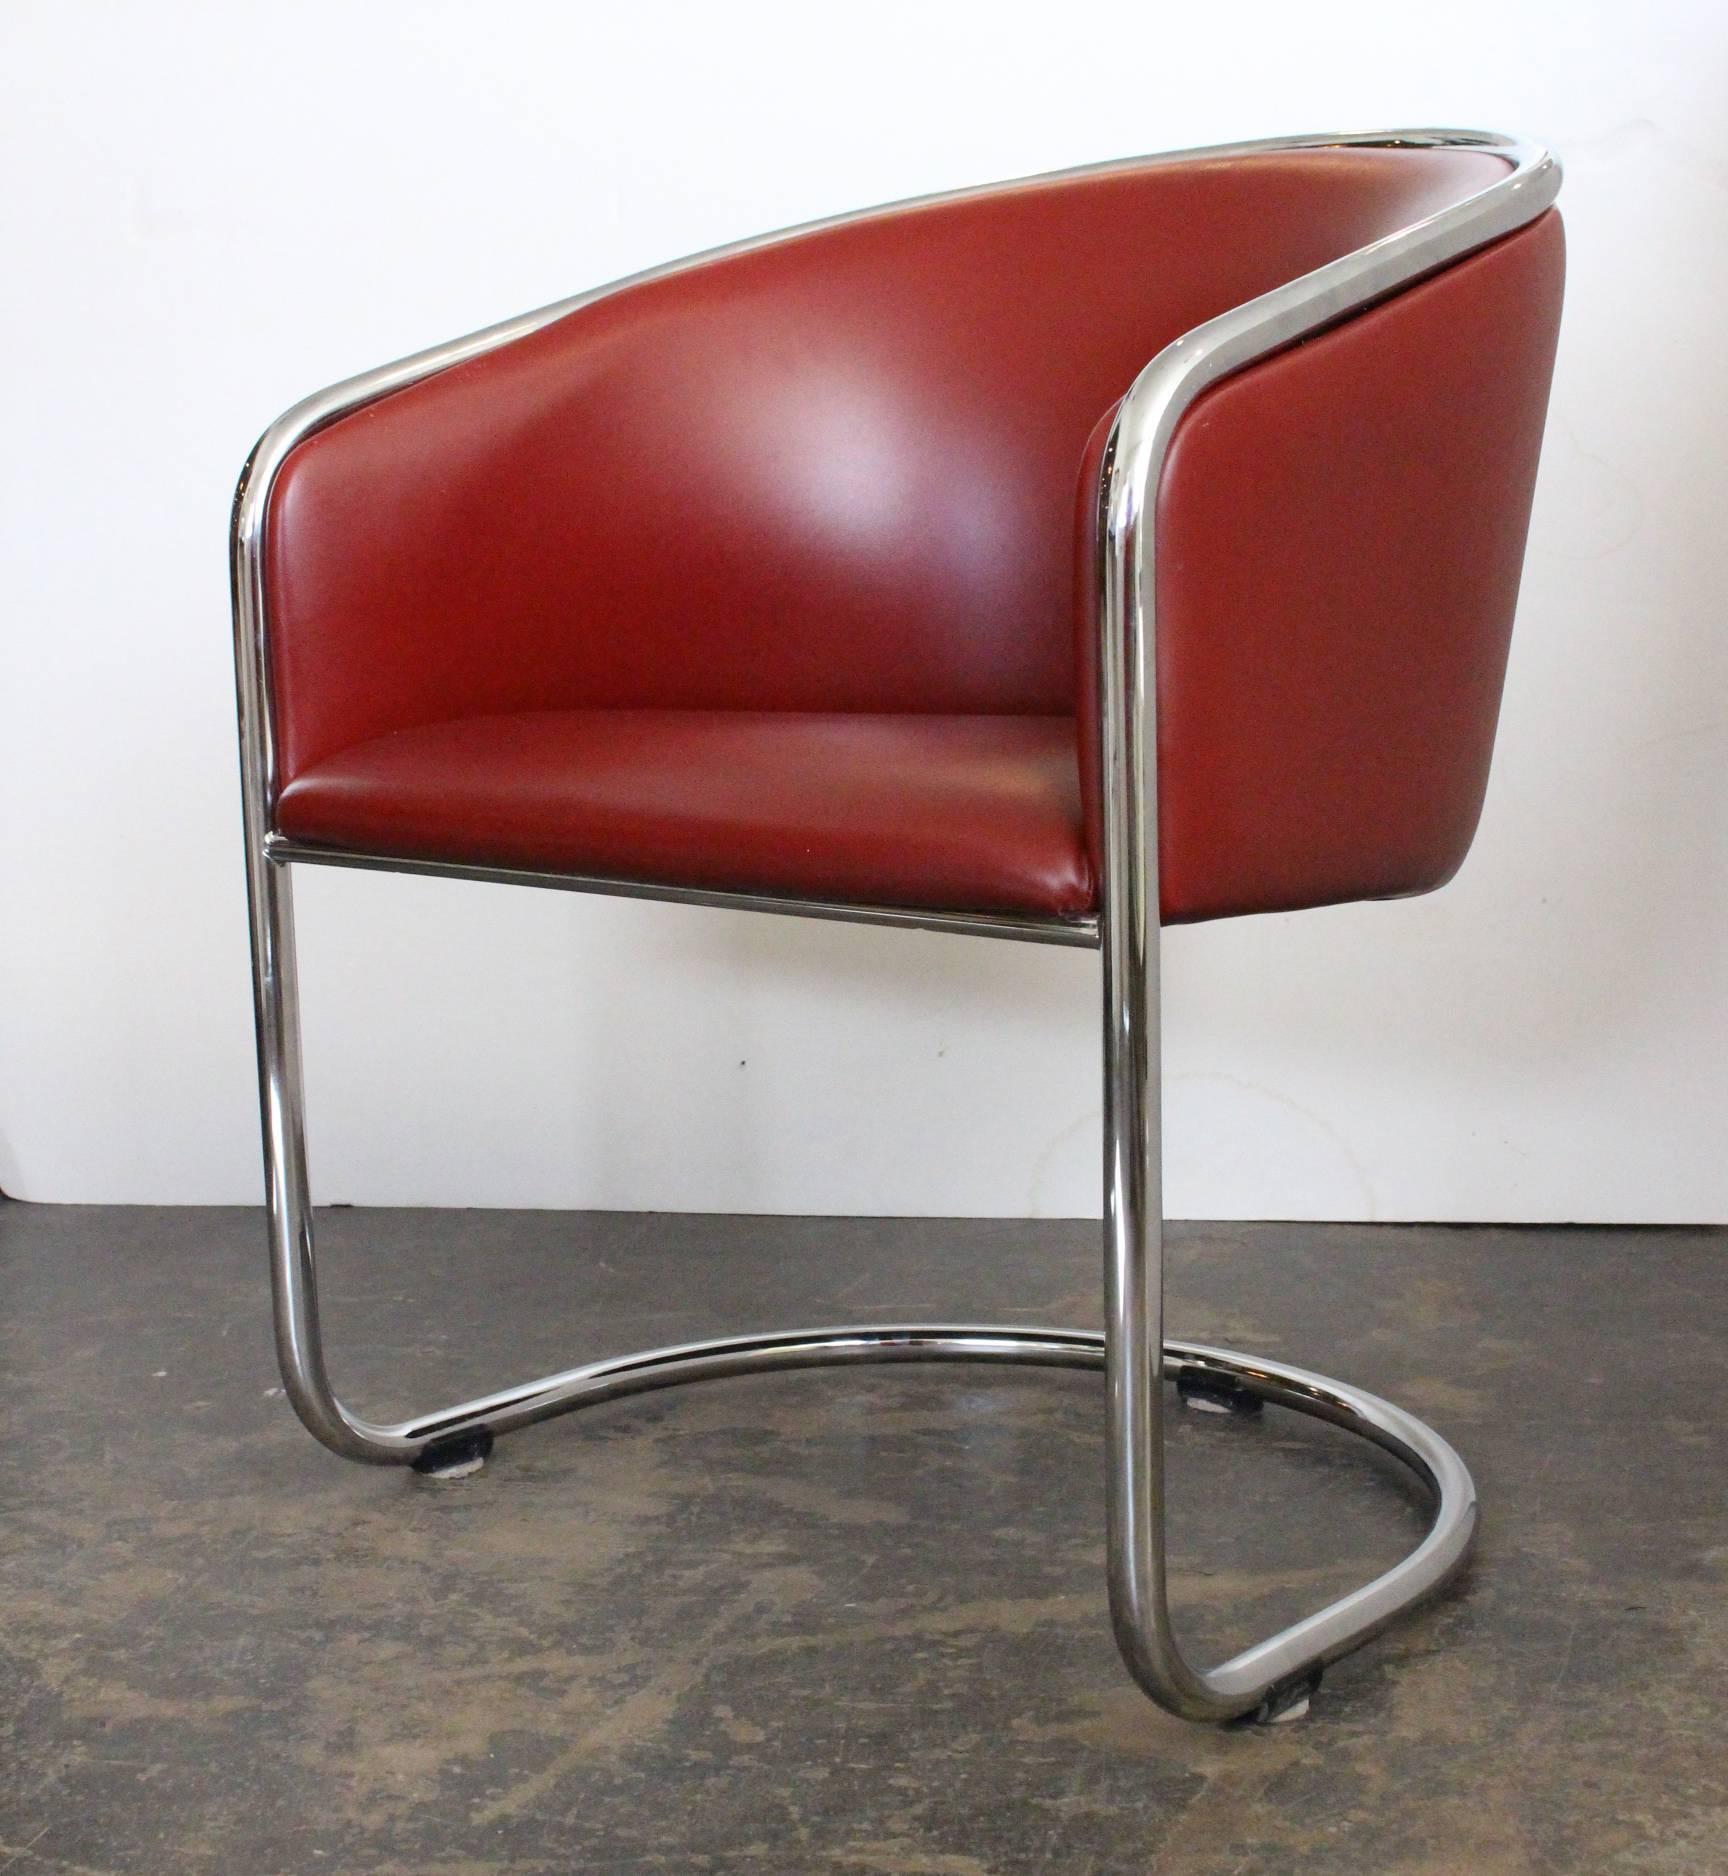 Set of 8 Cantilever Thonet Dining Chairs. Upholstered in a red vinyl. 

dimensions: 24.5